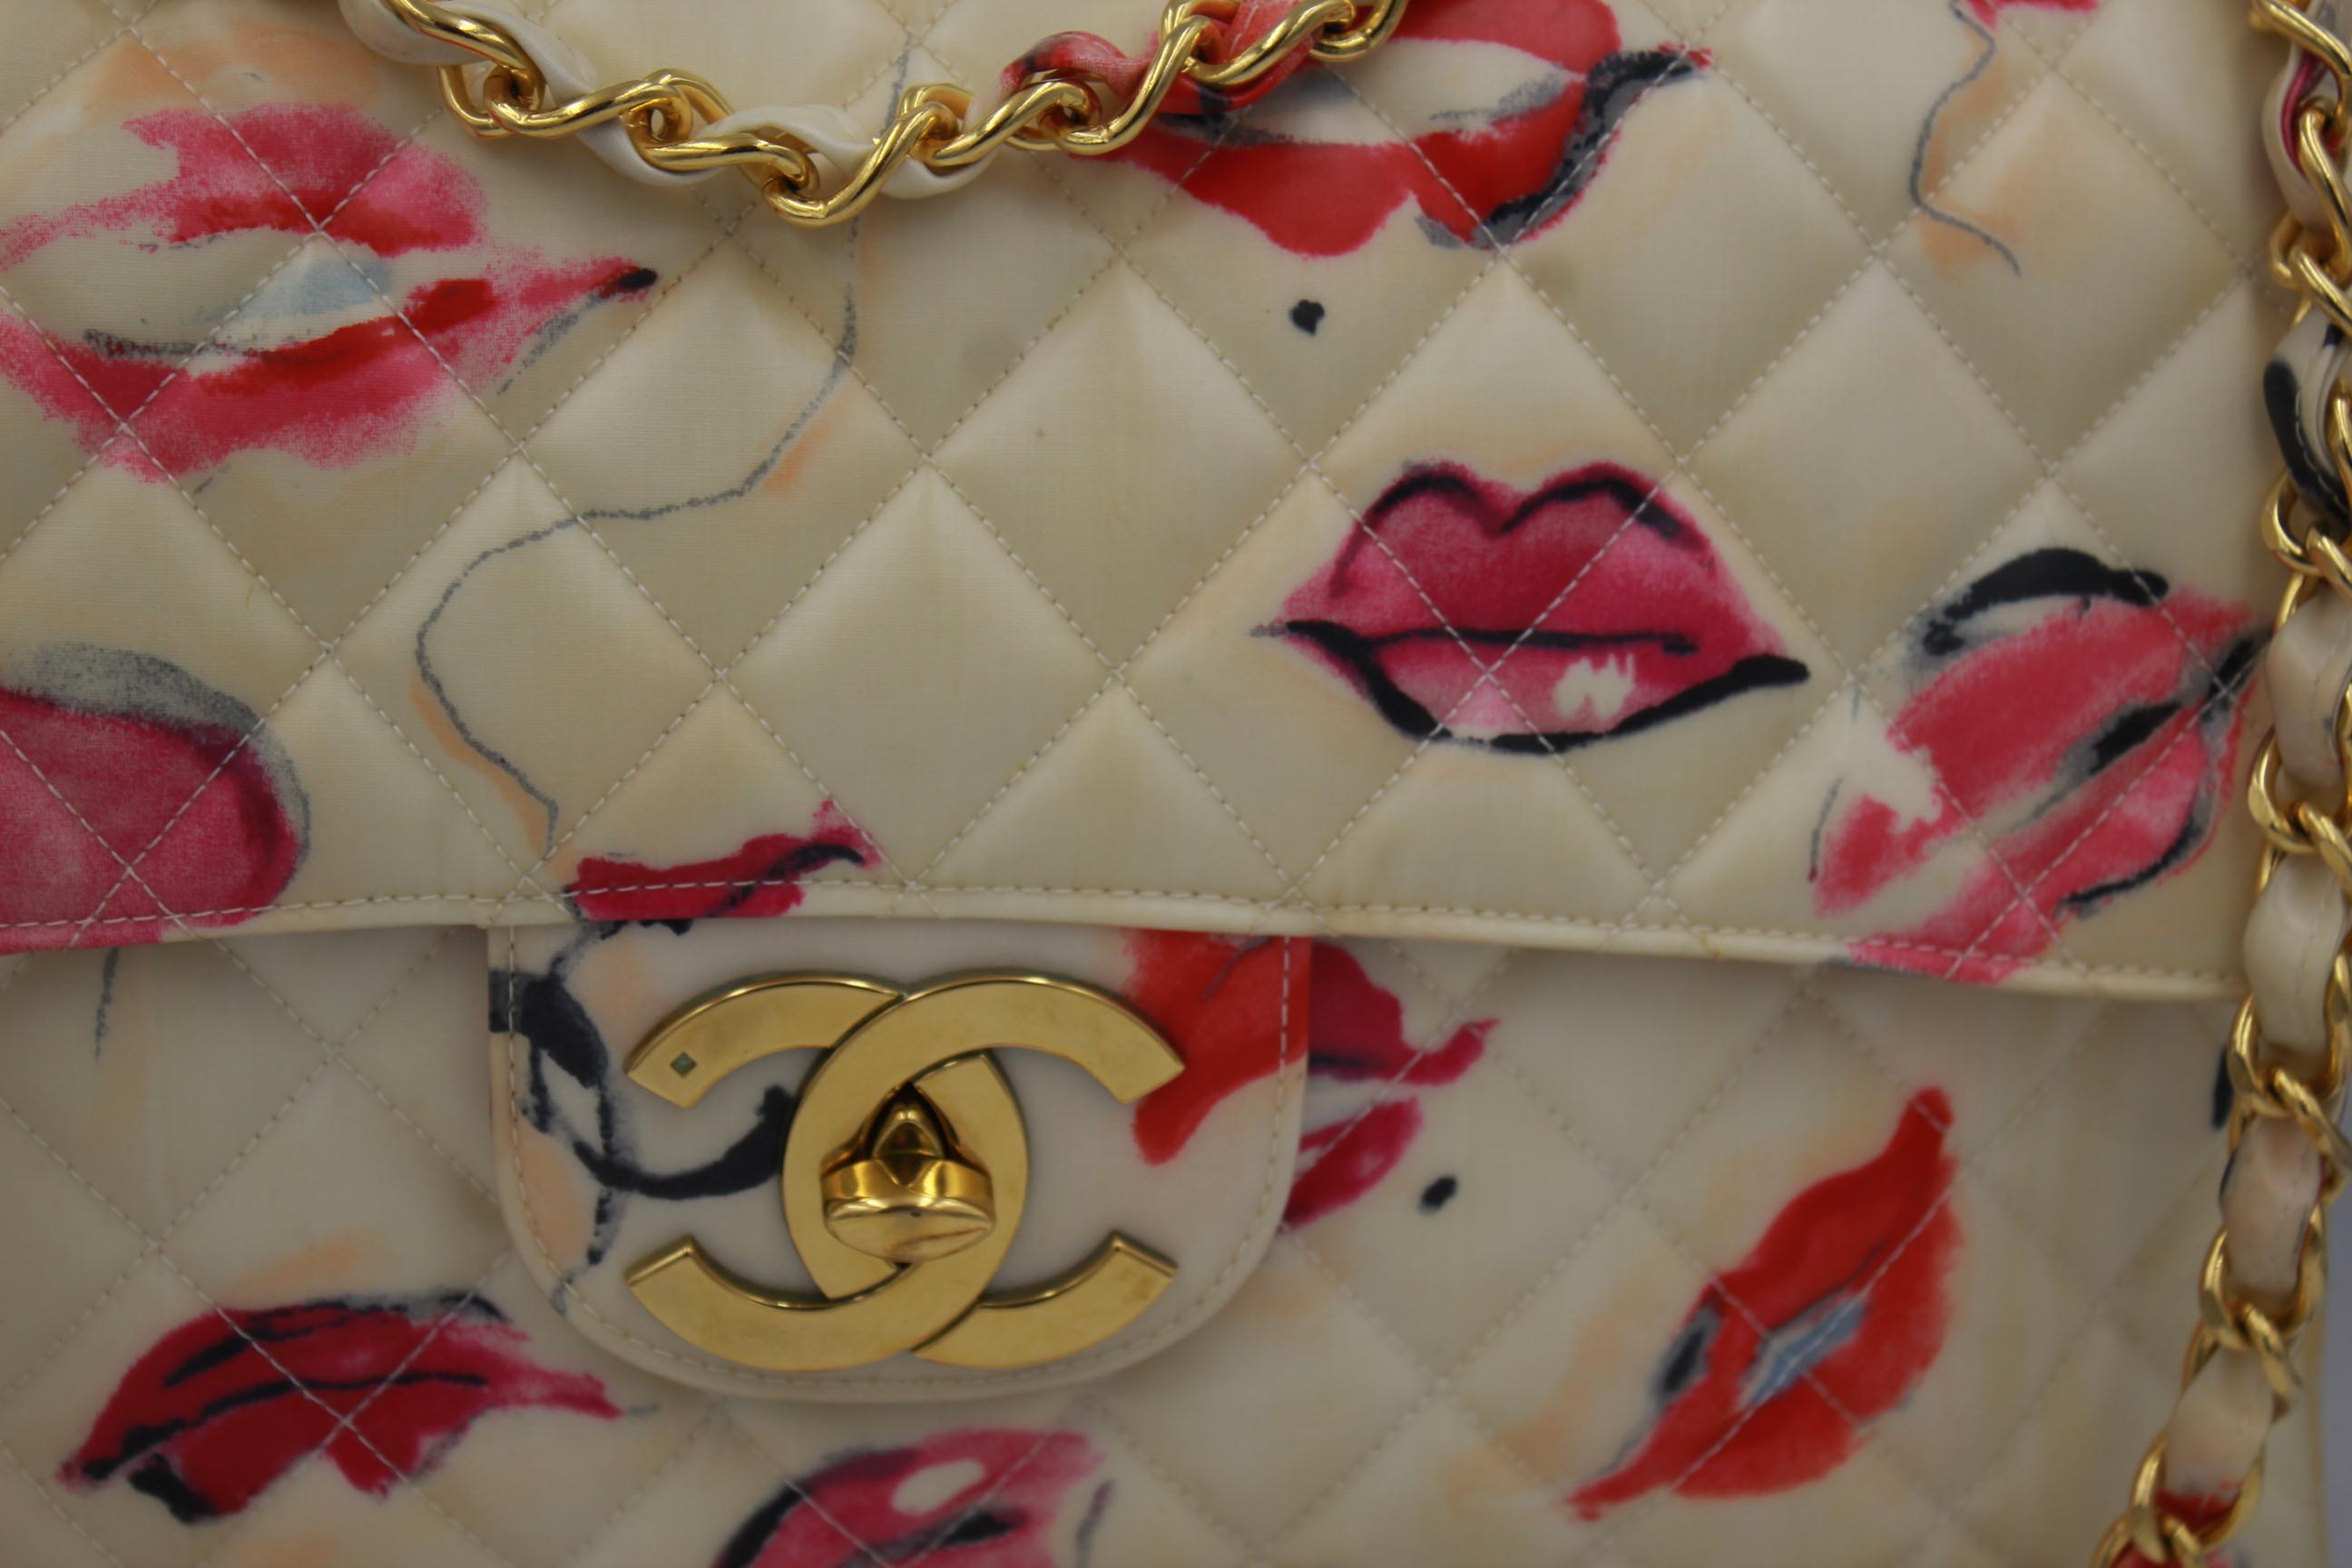 Vintage 1994 Collector Jumbo Chanel Lip and Kisses in vynil
Good vintage condition some signs of wear in hardware. Sides of the bags has been slightly darkened ( see images) but its totally homogeneous
Hologram damages inside but still some rests